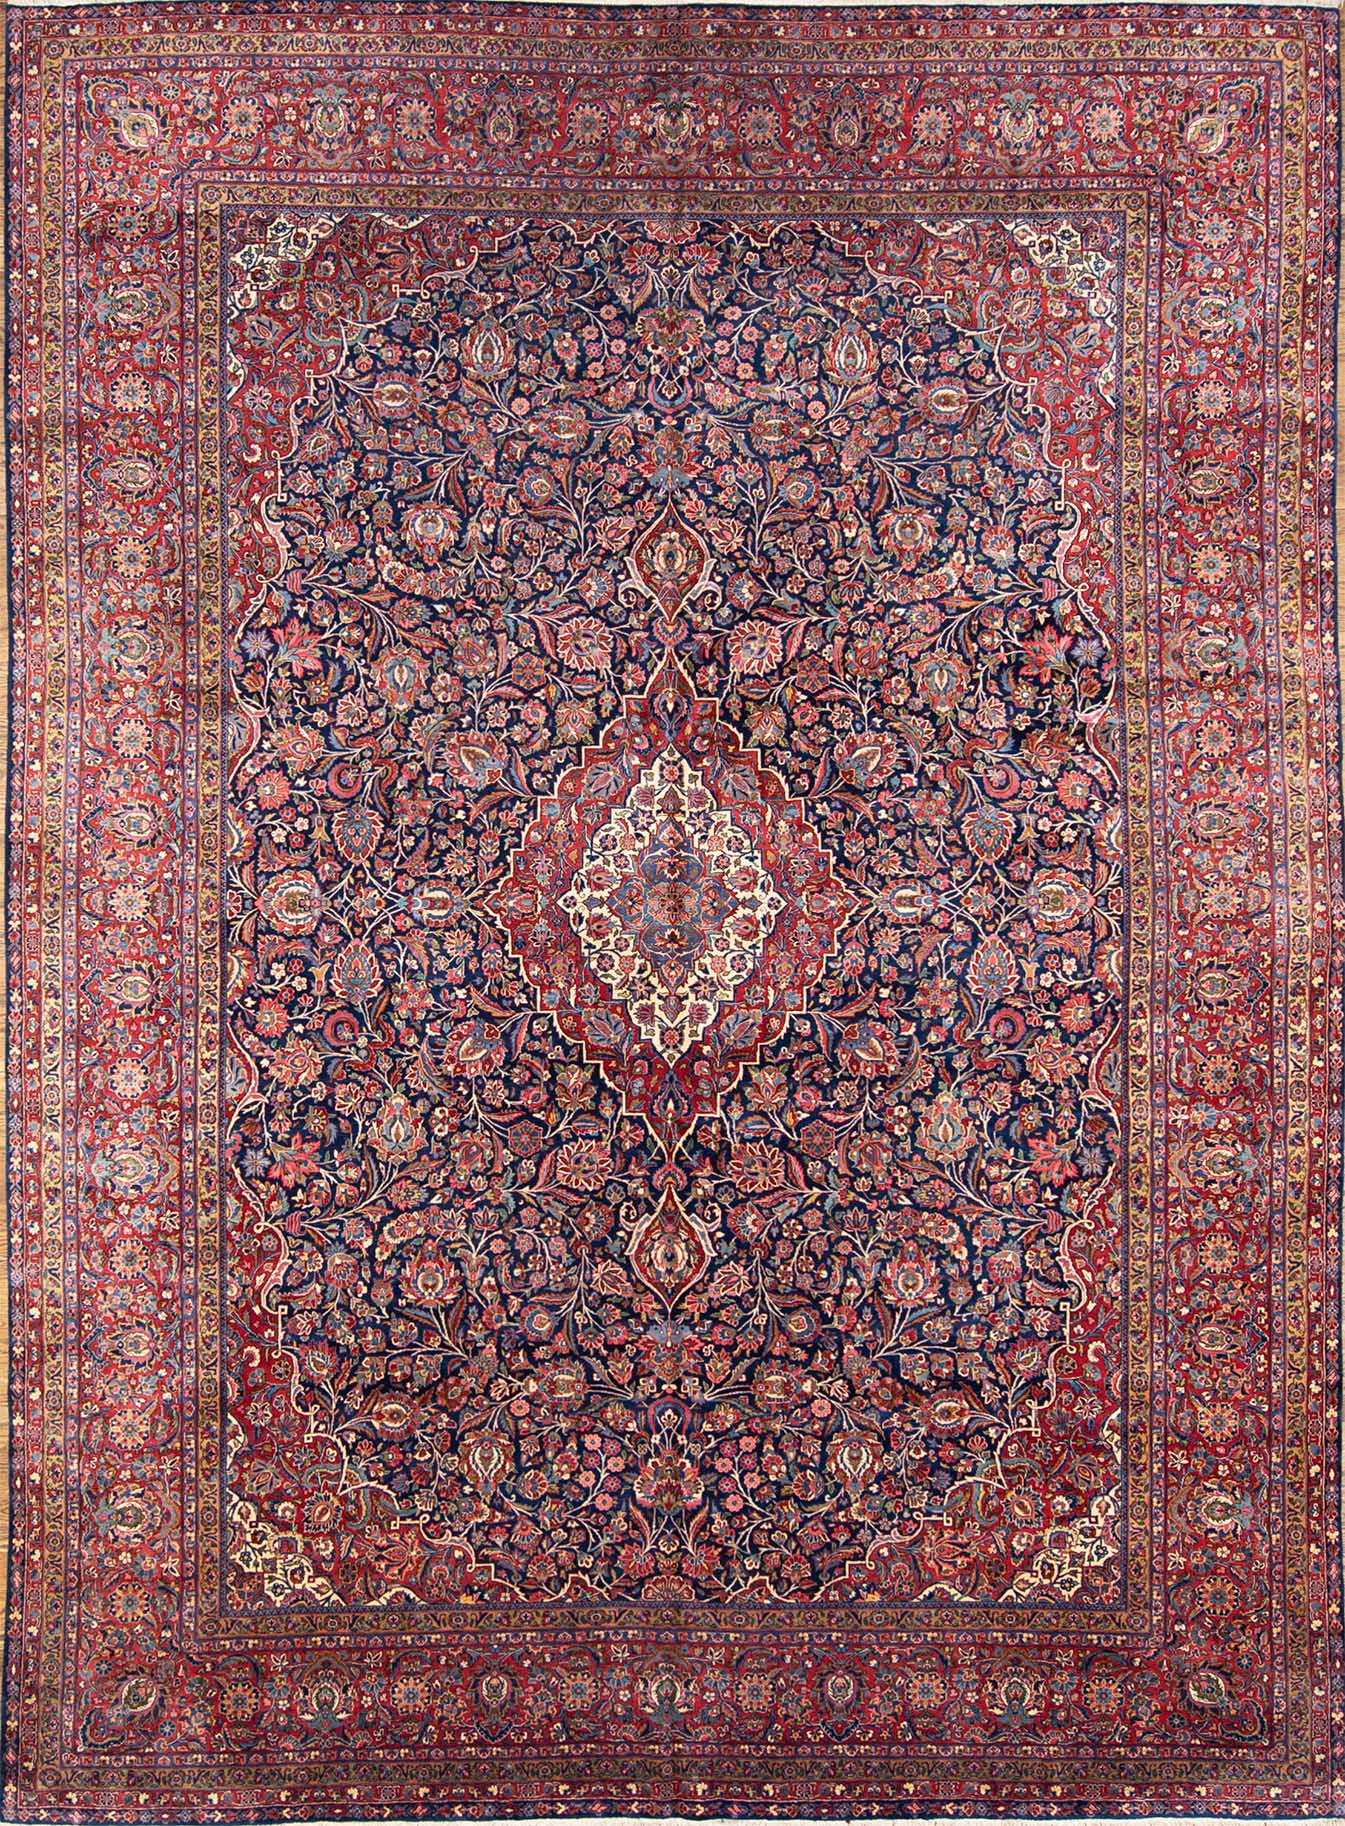 Real Persian rugs. A magnificent vintage floral Persian Kashan rug in navy blue and red border. Size 10.4x14.